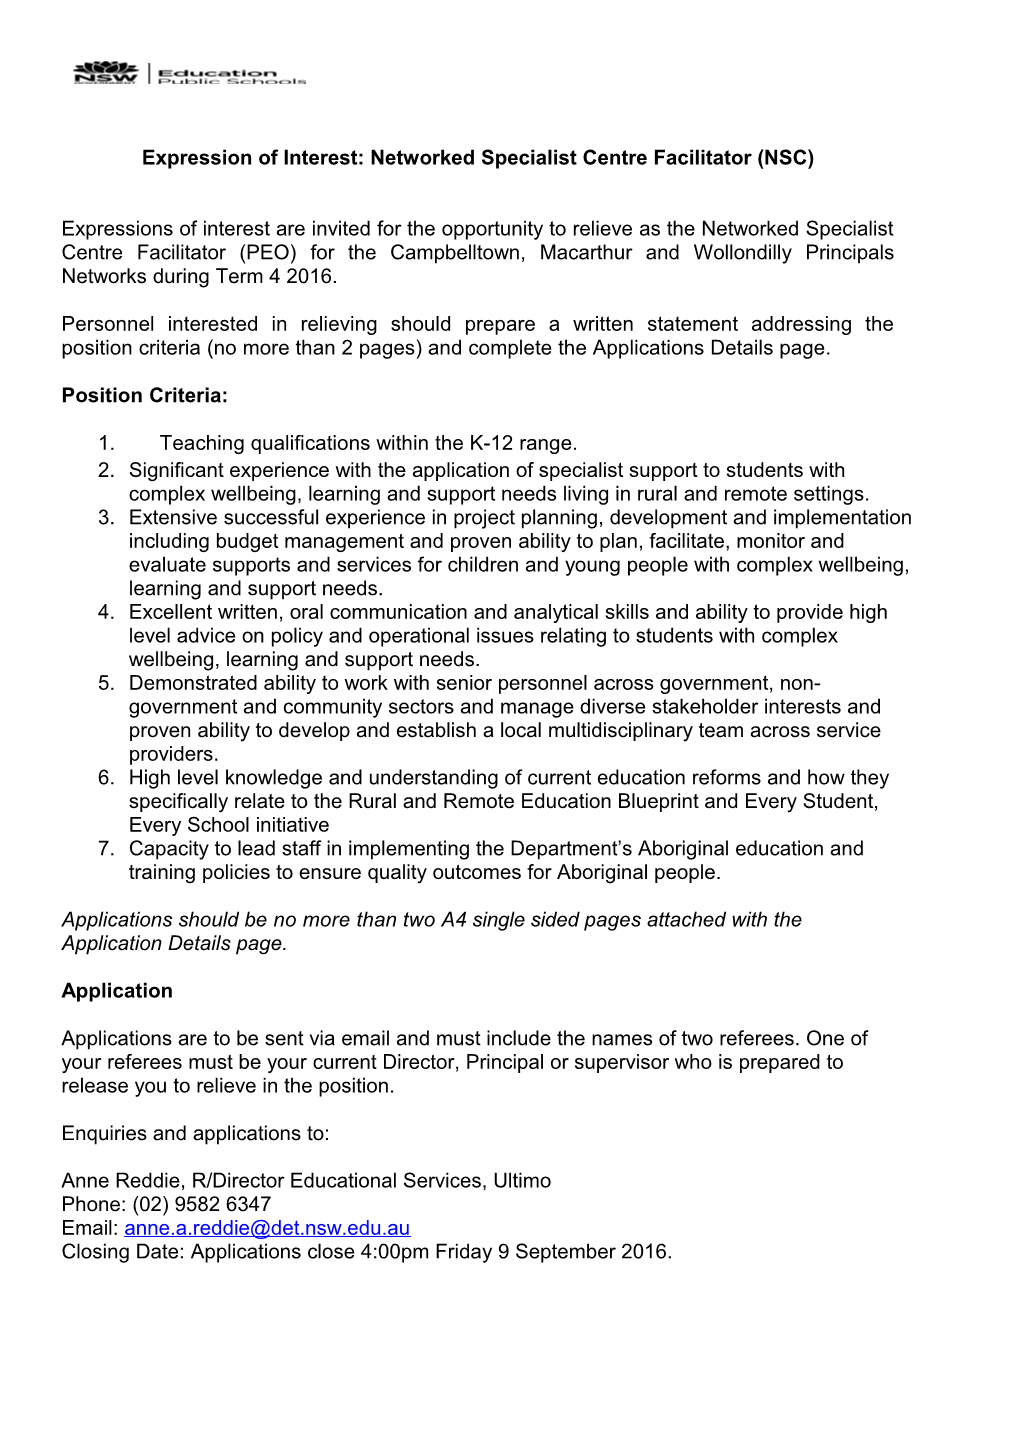 Expression of Interest: Networked Specialist Centre Facilitator (NSC)